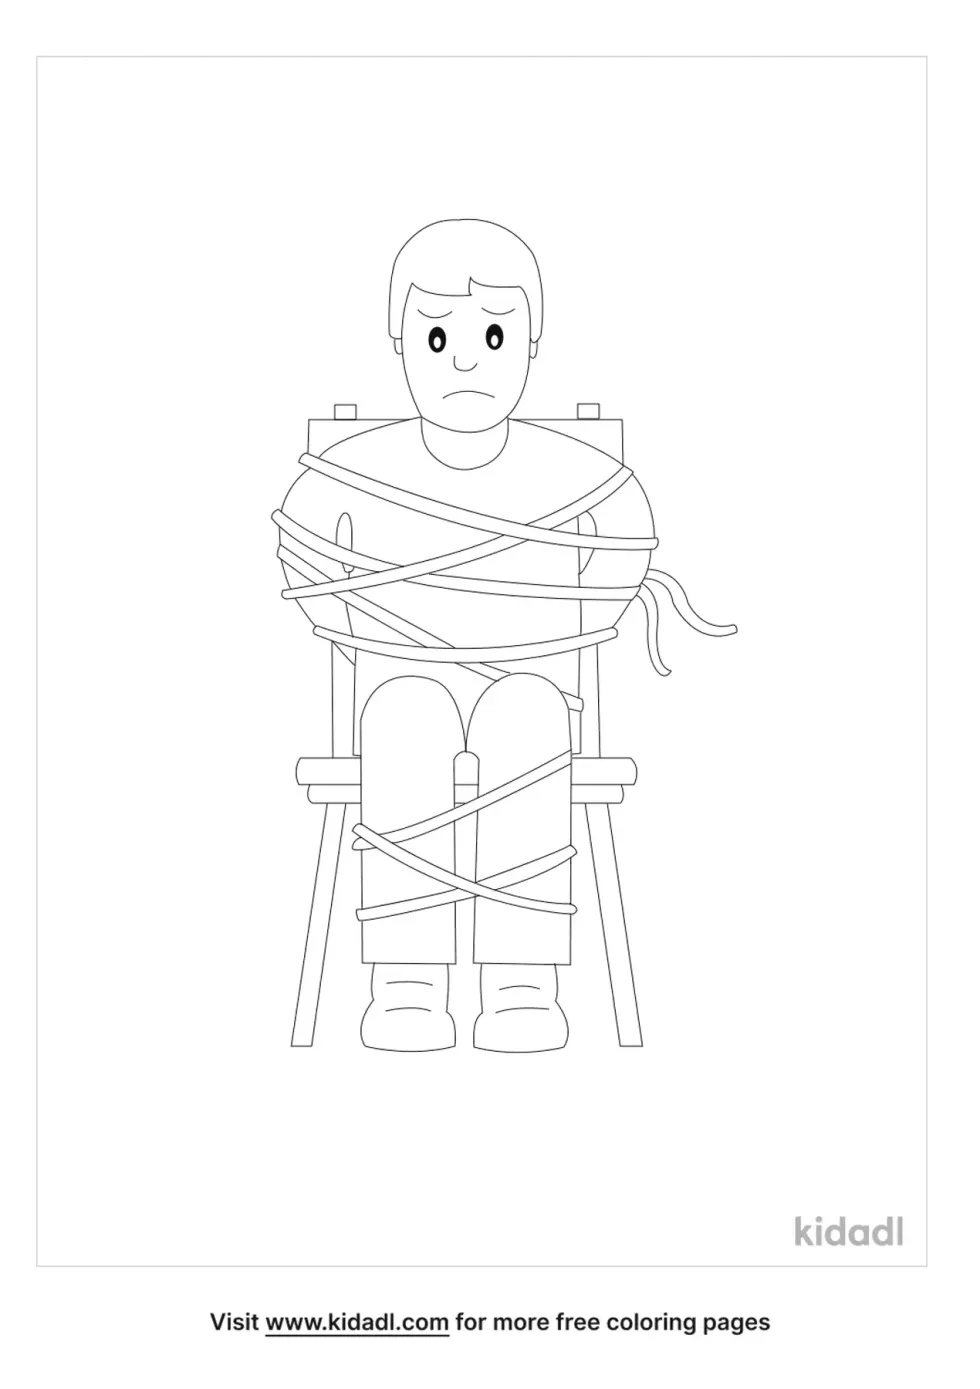 Man Tied Up Coloring Page